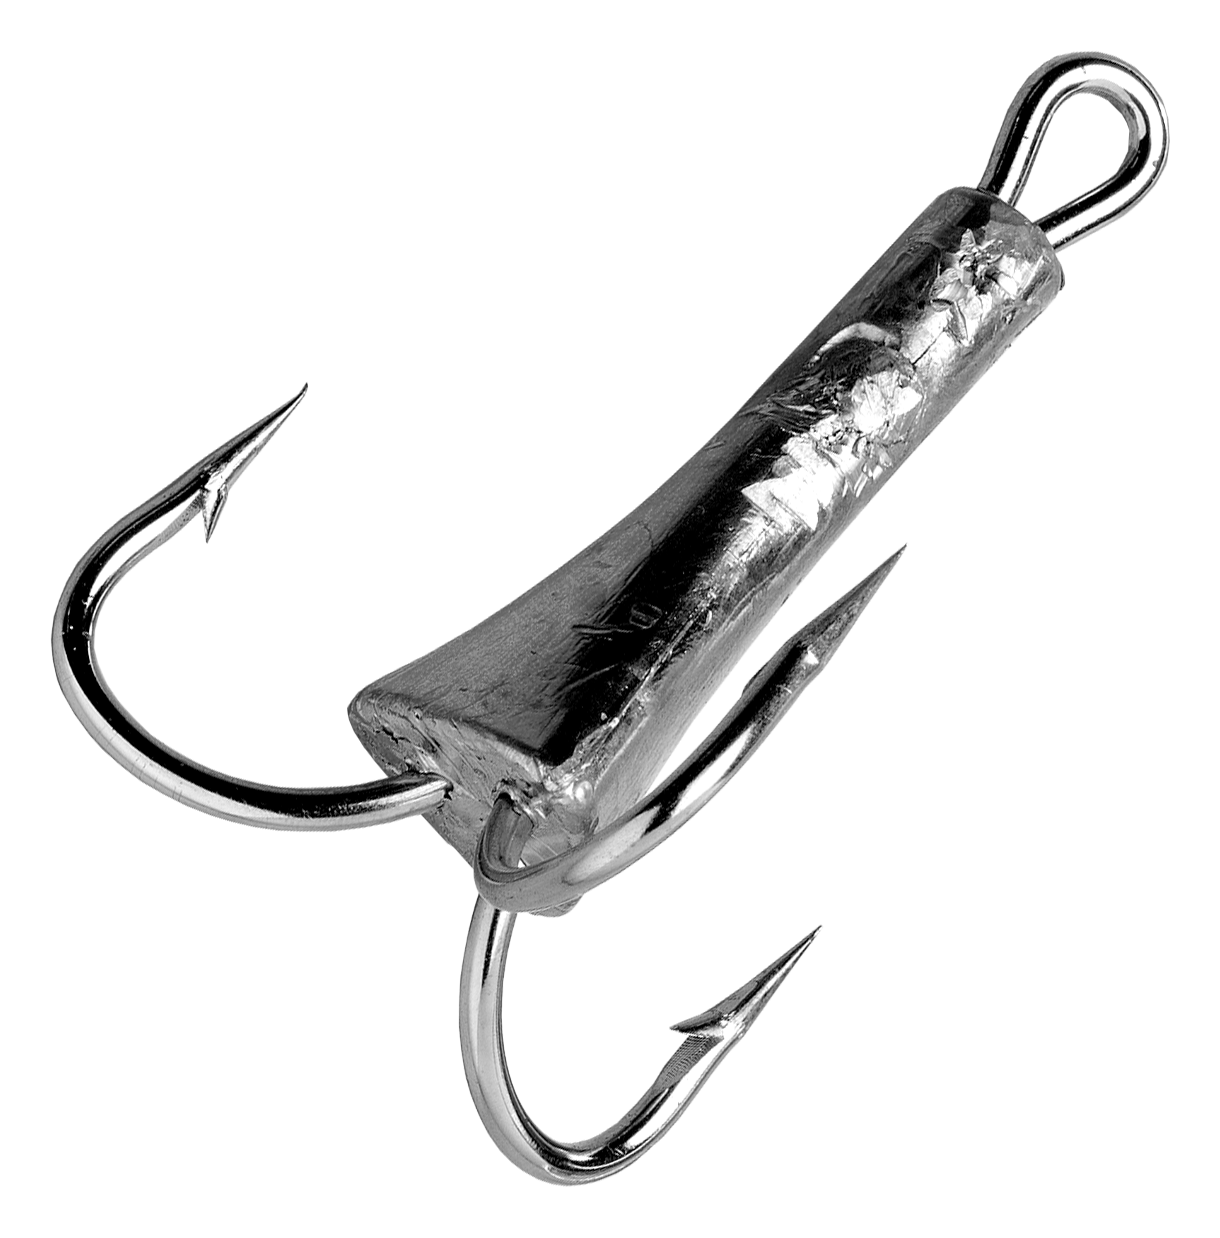 Snagging Weighted Treble Hooks, 5pcs Snagging Hooks Large